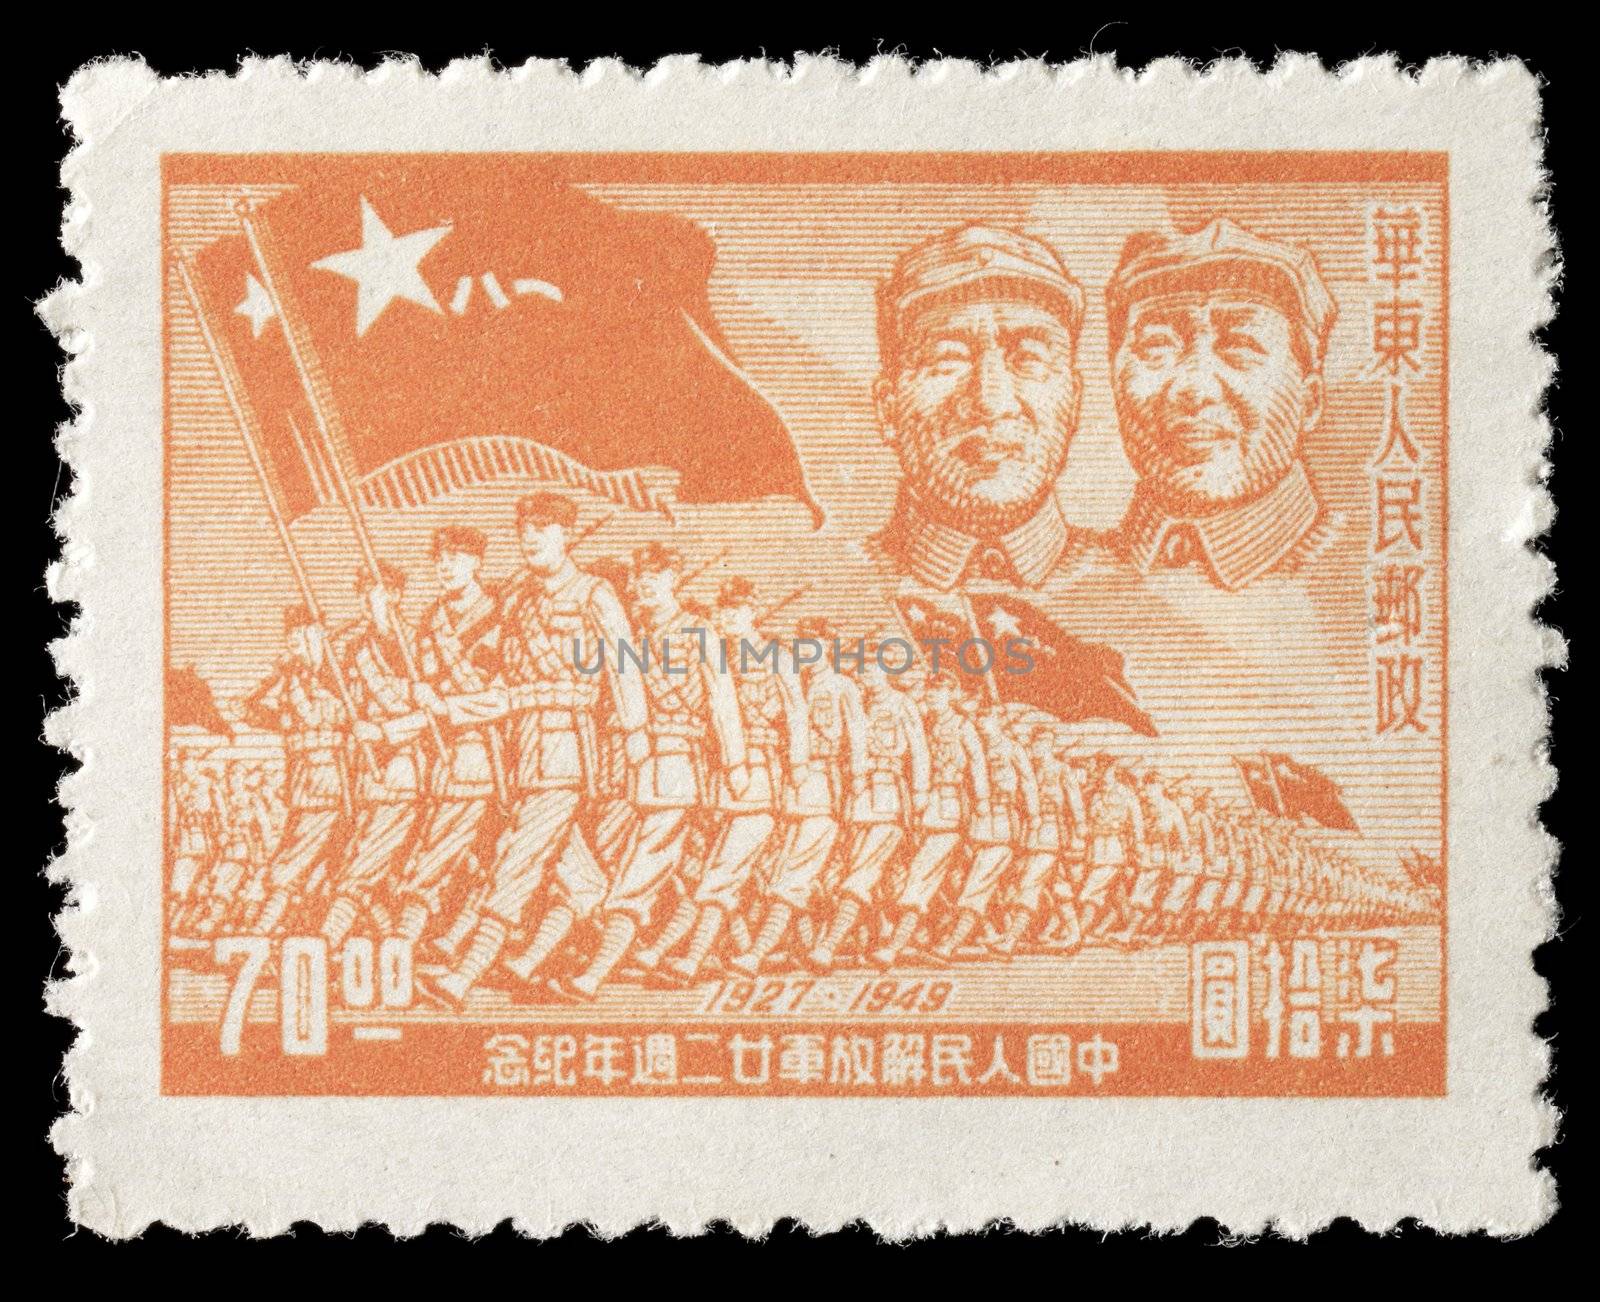 Chinese Stamp by Stocksnapper